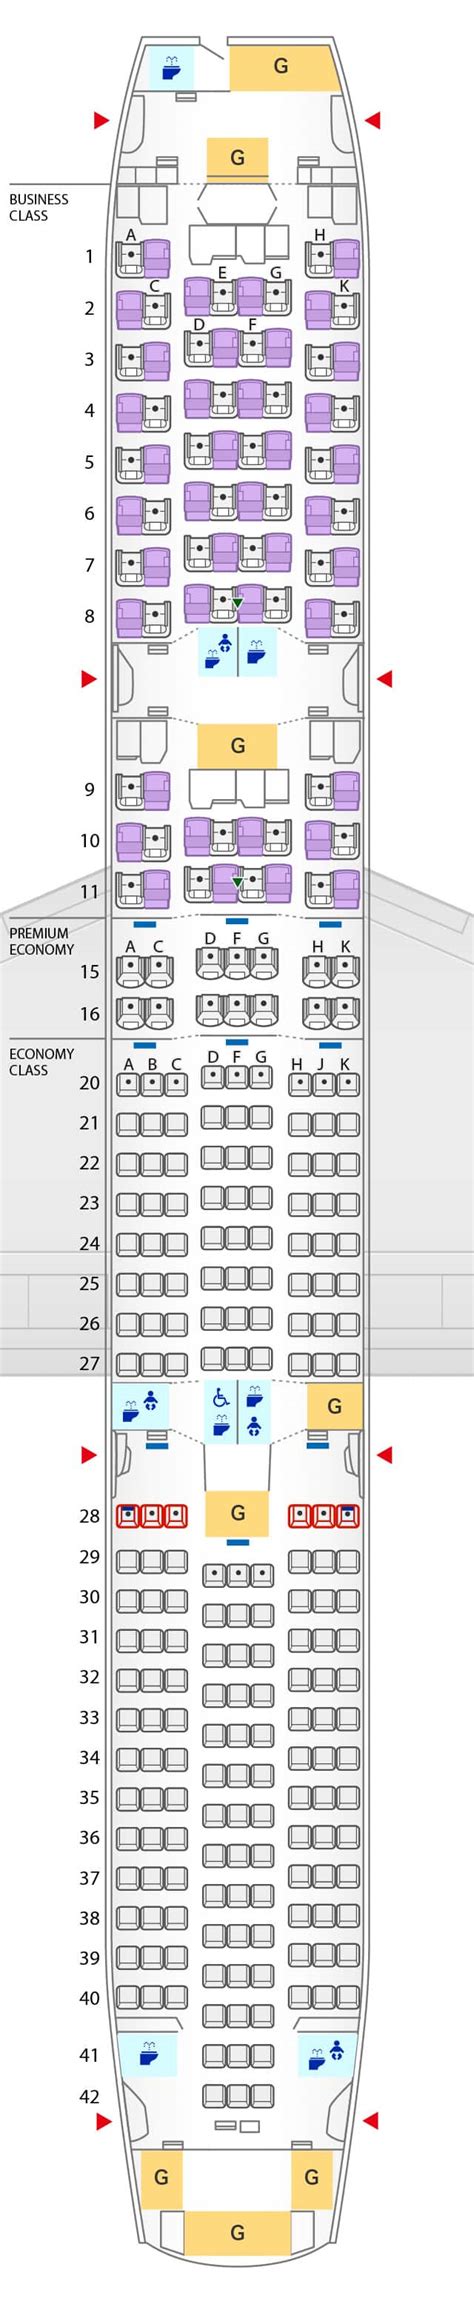  This Boeing 787-9 (789) seats 282 passengers and is primarily used on International routes. The cabin has been updated with the latest features and amenities including larger overhead bins and windows, dimmable shades, higher ceilings, lower cabin pressure, personal ventilation air vents above each seat, Audio Video on Demand with large touch screen LCD's and LED mood lighting throughout the ... . 